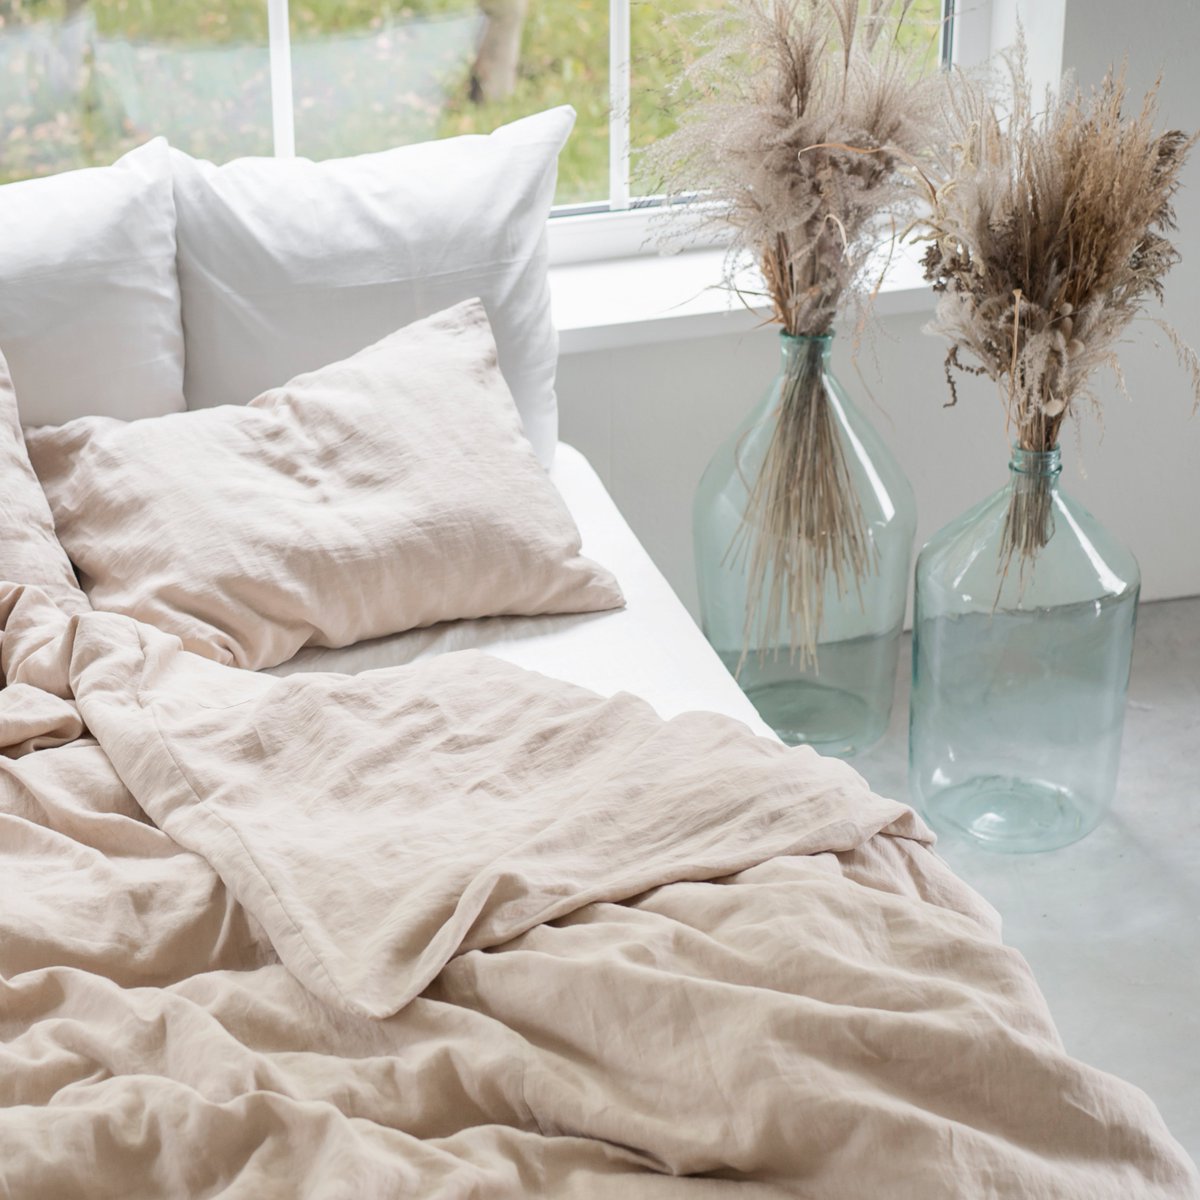 How good after a hard day’s work just to dip into bedding.

#bedroomproductionline #cozybedroom #linen #linenrain #MyEtsyFind #interiordecor #naturalinterior #bohobedroom #scandinavianstyle #etsyhome #etsy #etsylinen #bedlinen #linenstyling #hyggedecor #naturalbedding